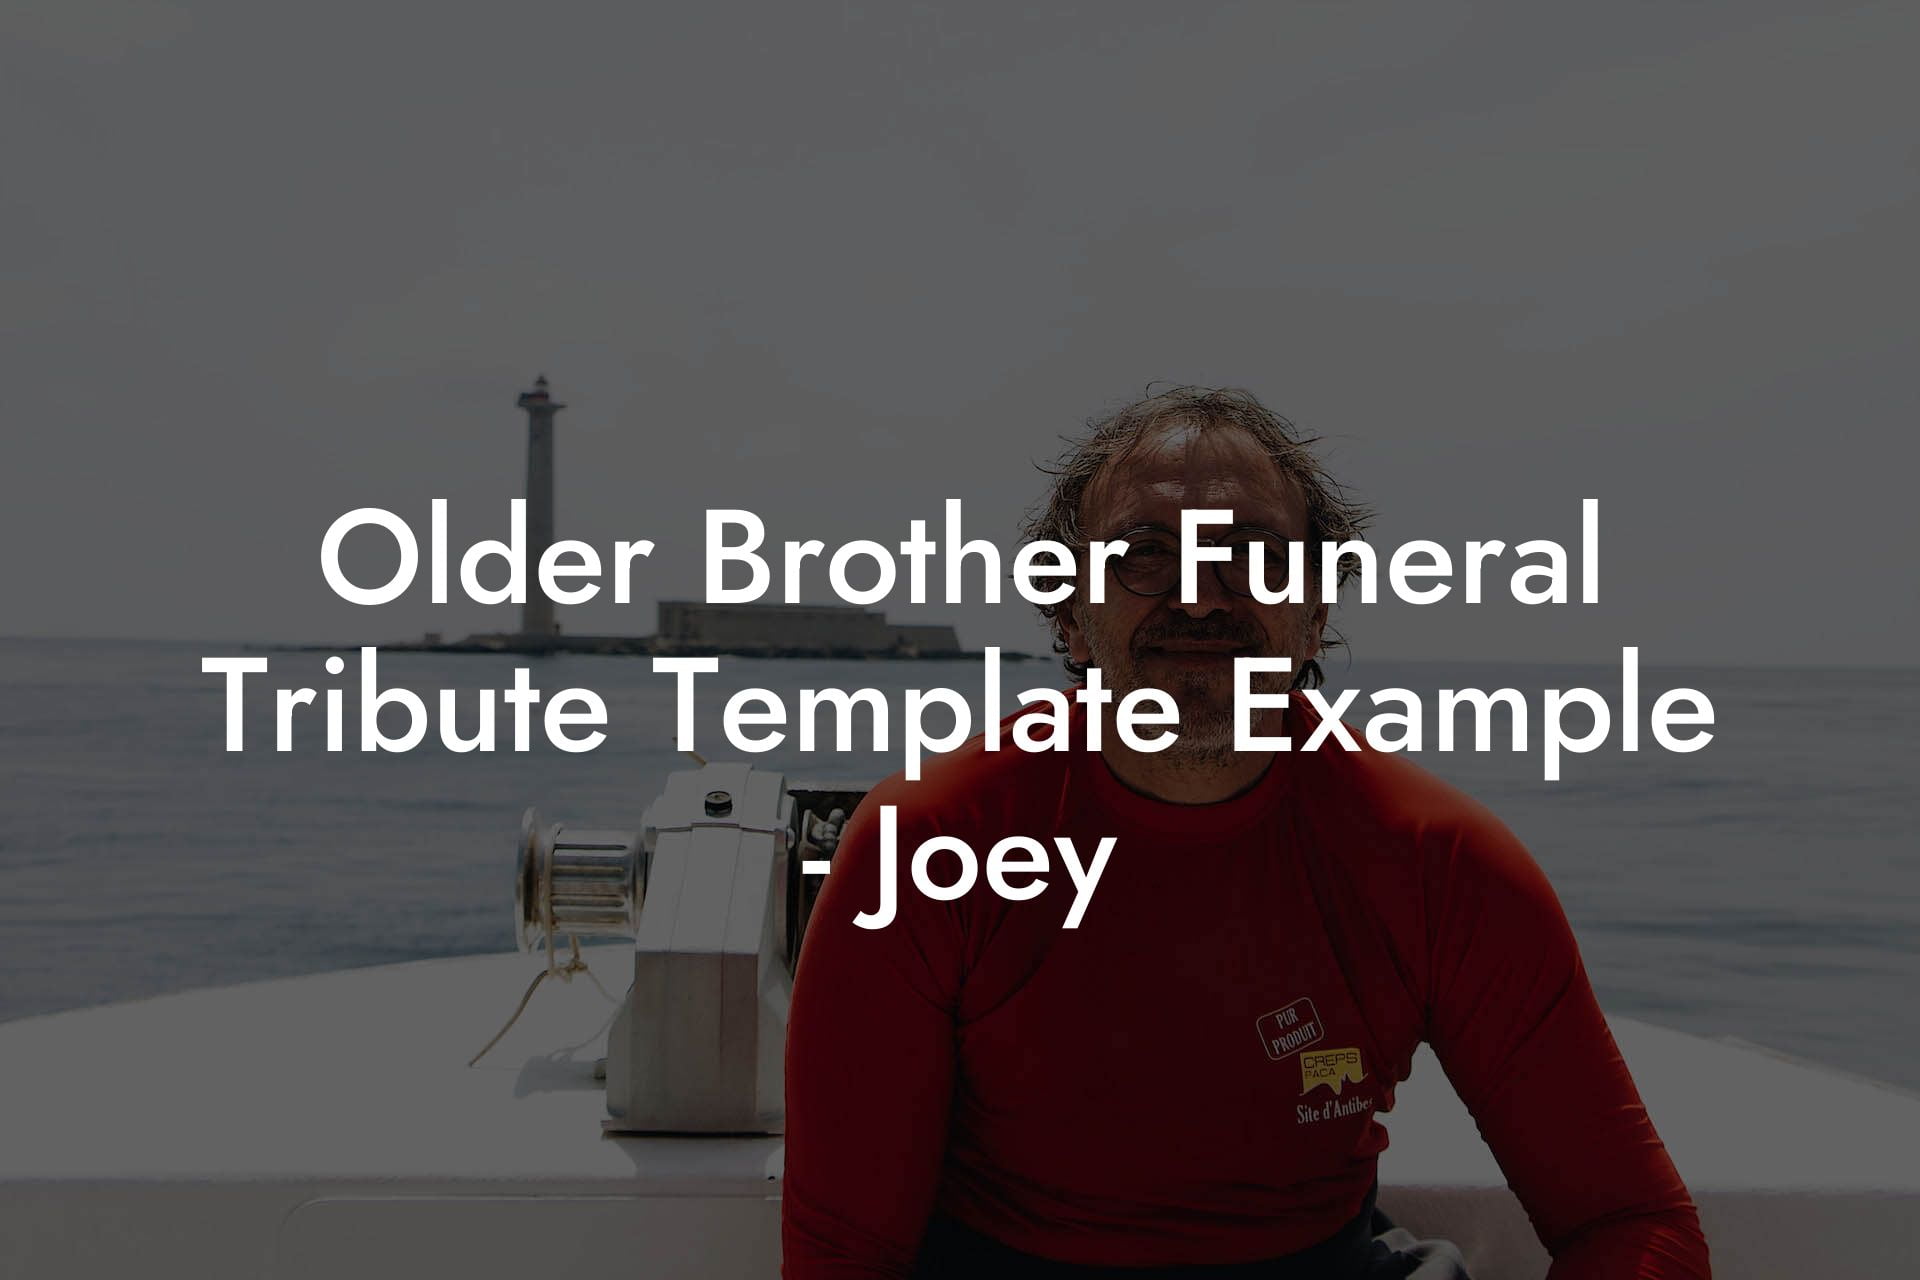 Older Brother Funeral Tribute Template Example   Joey